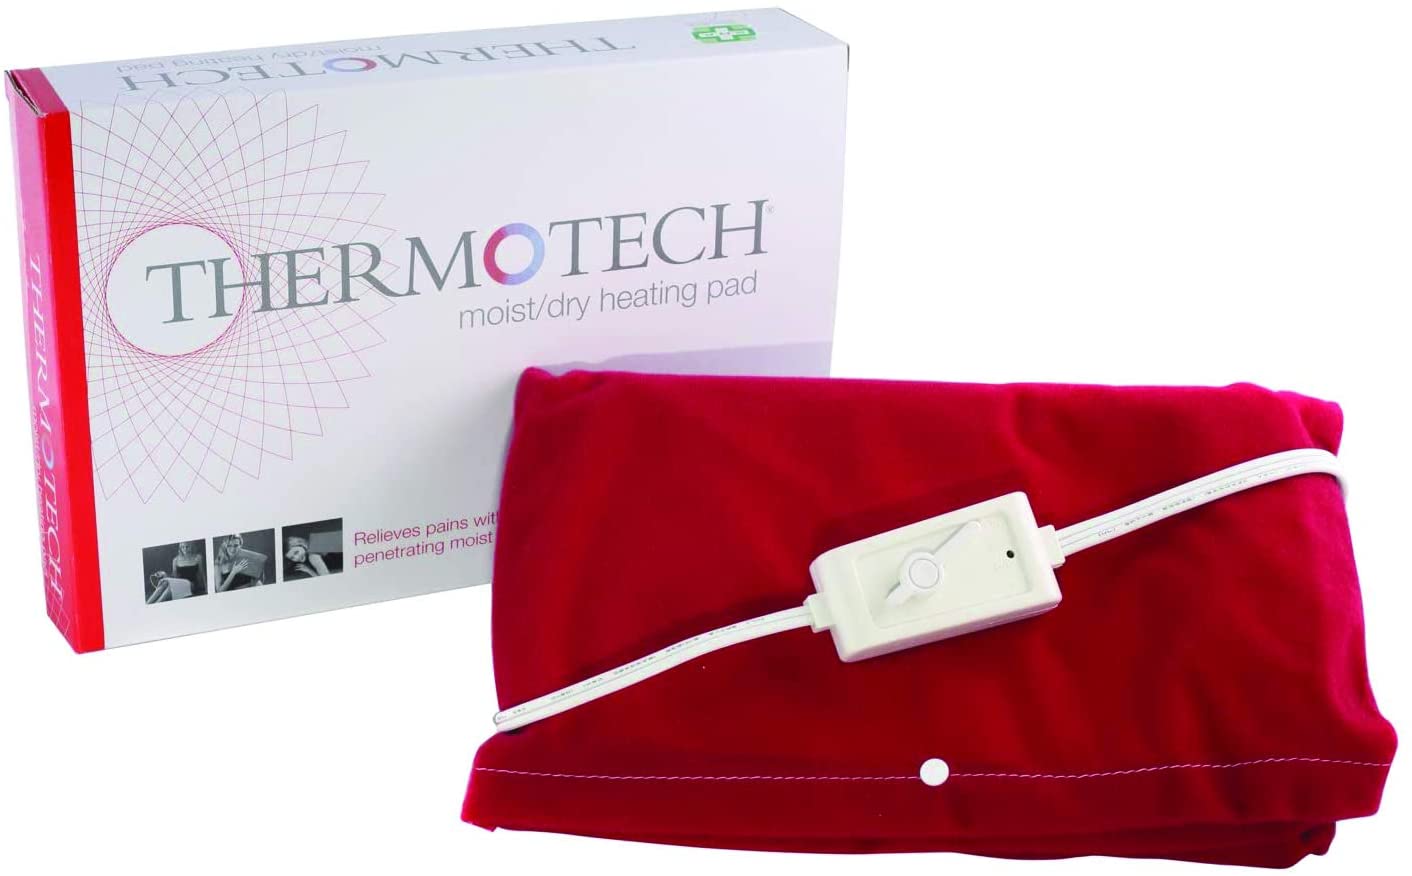 Electric Heating Pad for Back Pain and Cramps by Thermotech - Large Moist Heat/Dry Blanket with Auto Shut Off - 24" x 12"